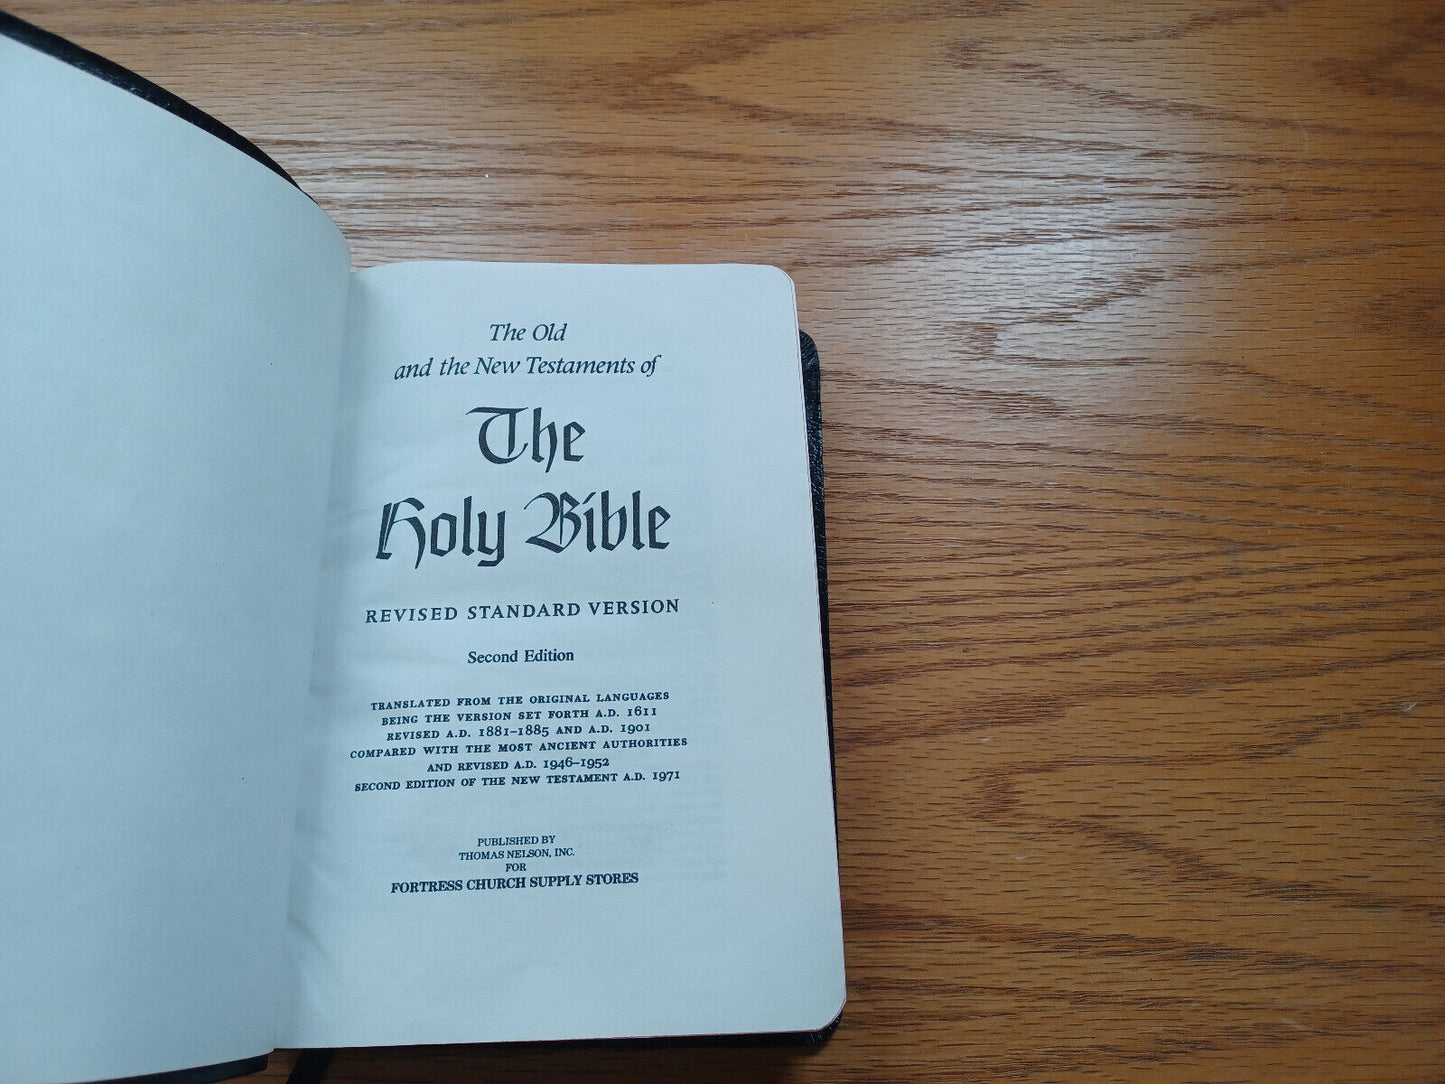 The Holy Bible Rsv 1971 Thomas Nelson 2nd Ed With Helps Dictionary Concordance